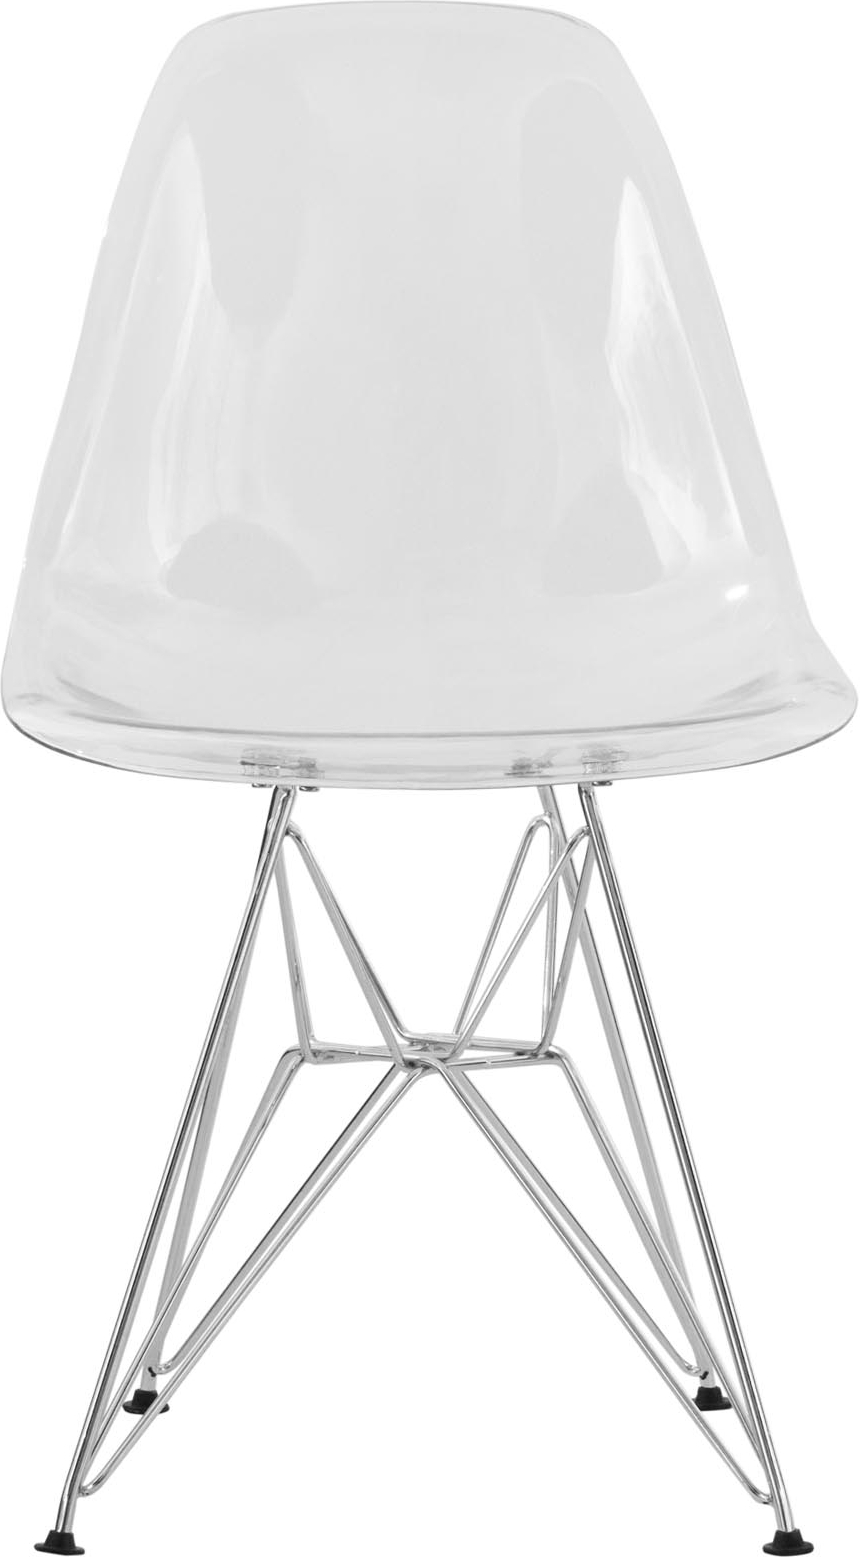 transparent side chair